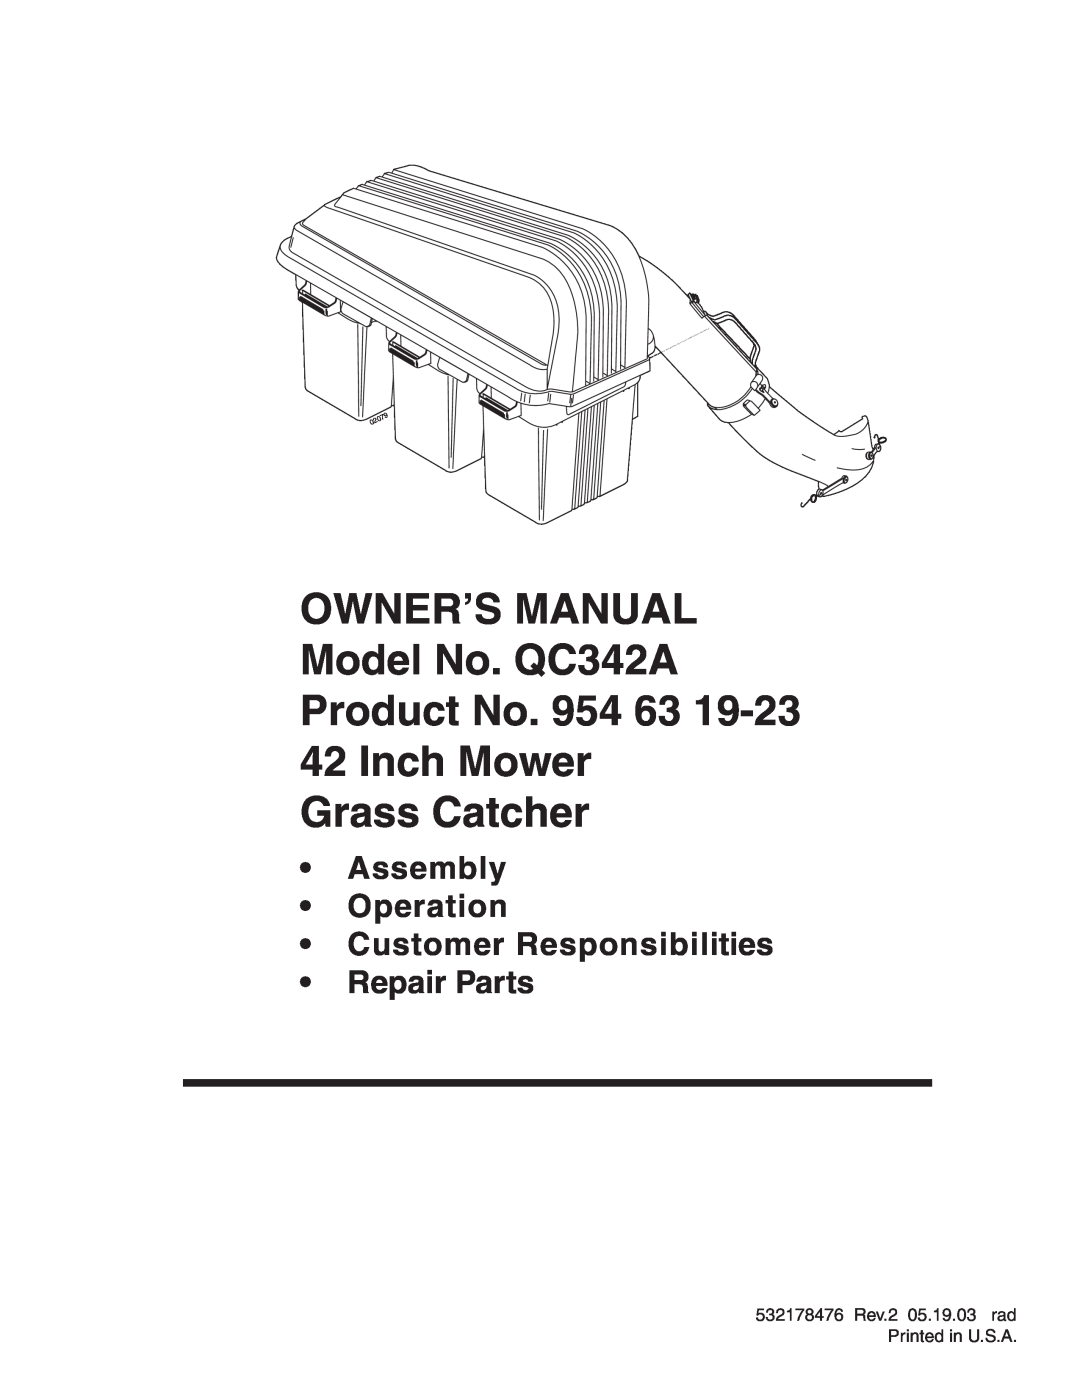 Poulan 954 63 19-23, QC342A, 532178476 owner manual Product No. 954 63 42 Inch Mower Grass Catcher, •Repair Parts, 02079 